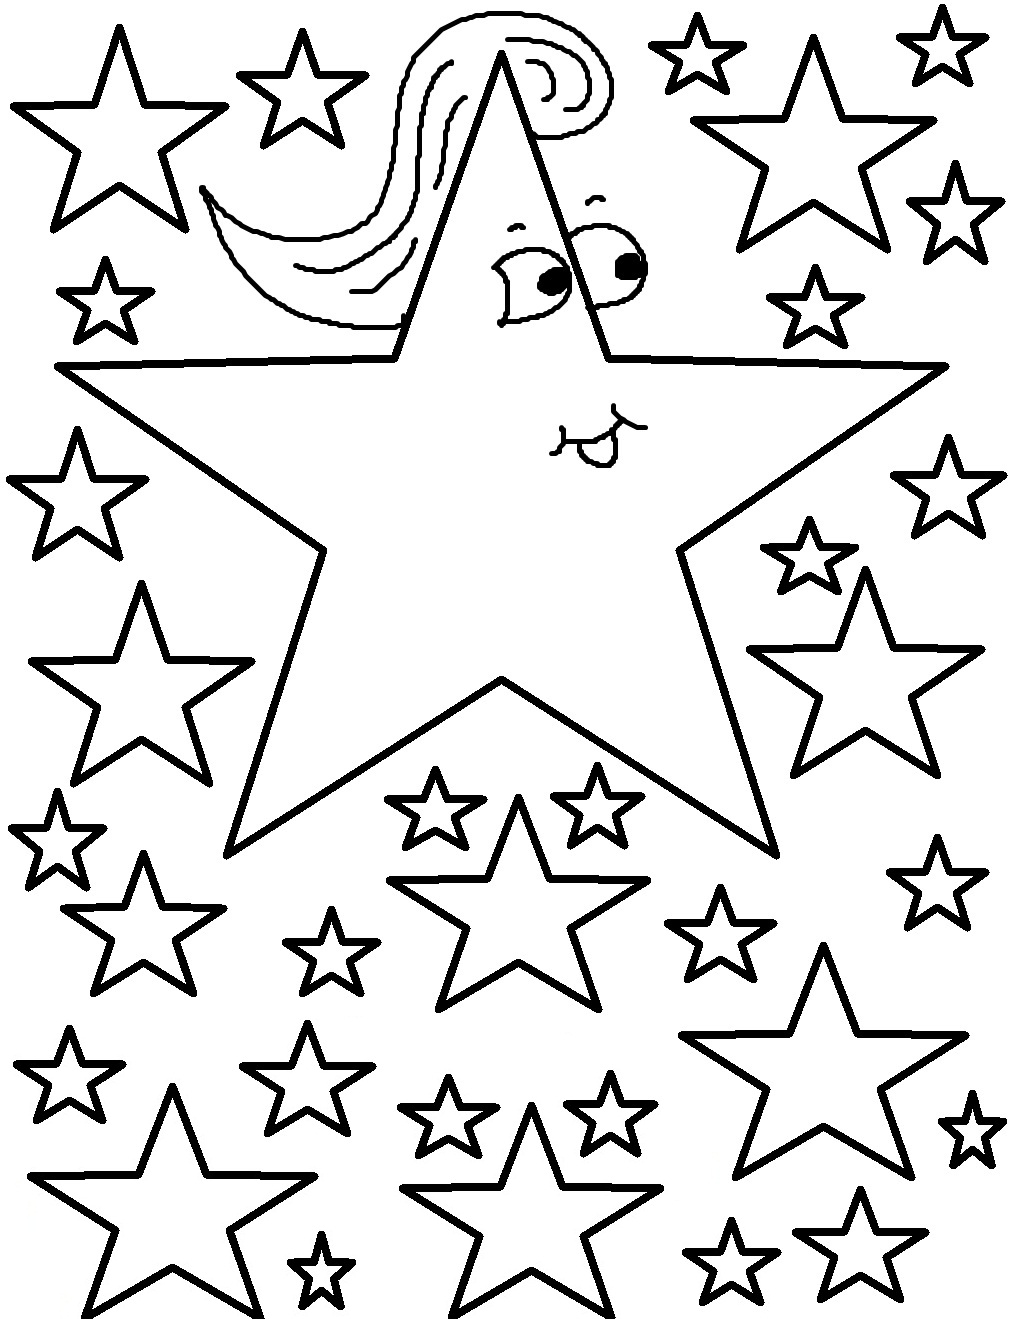 698 Animal Free Star Coloring Pages for Adult